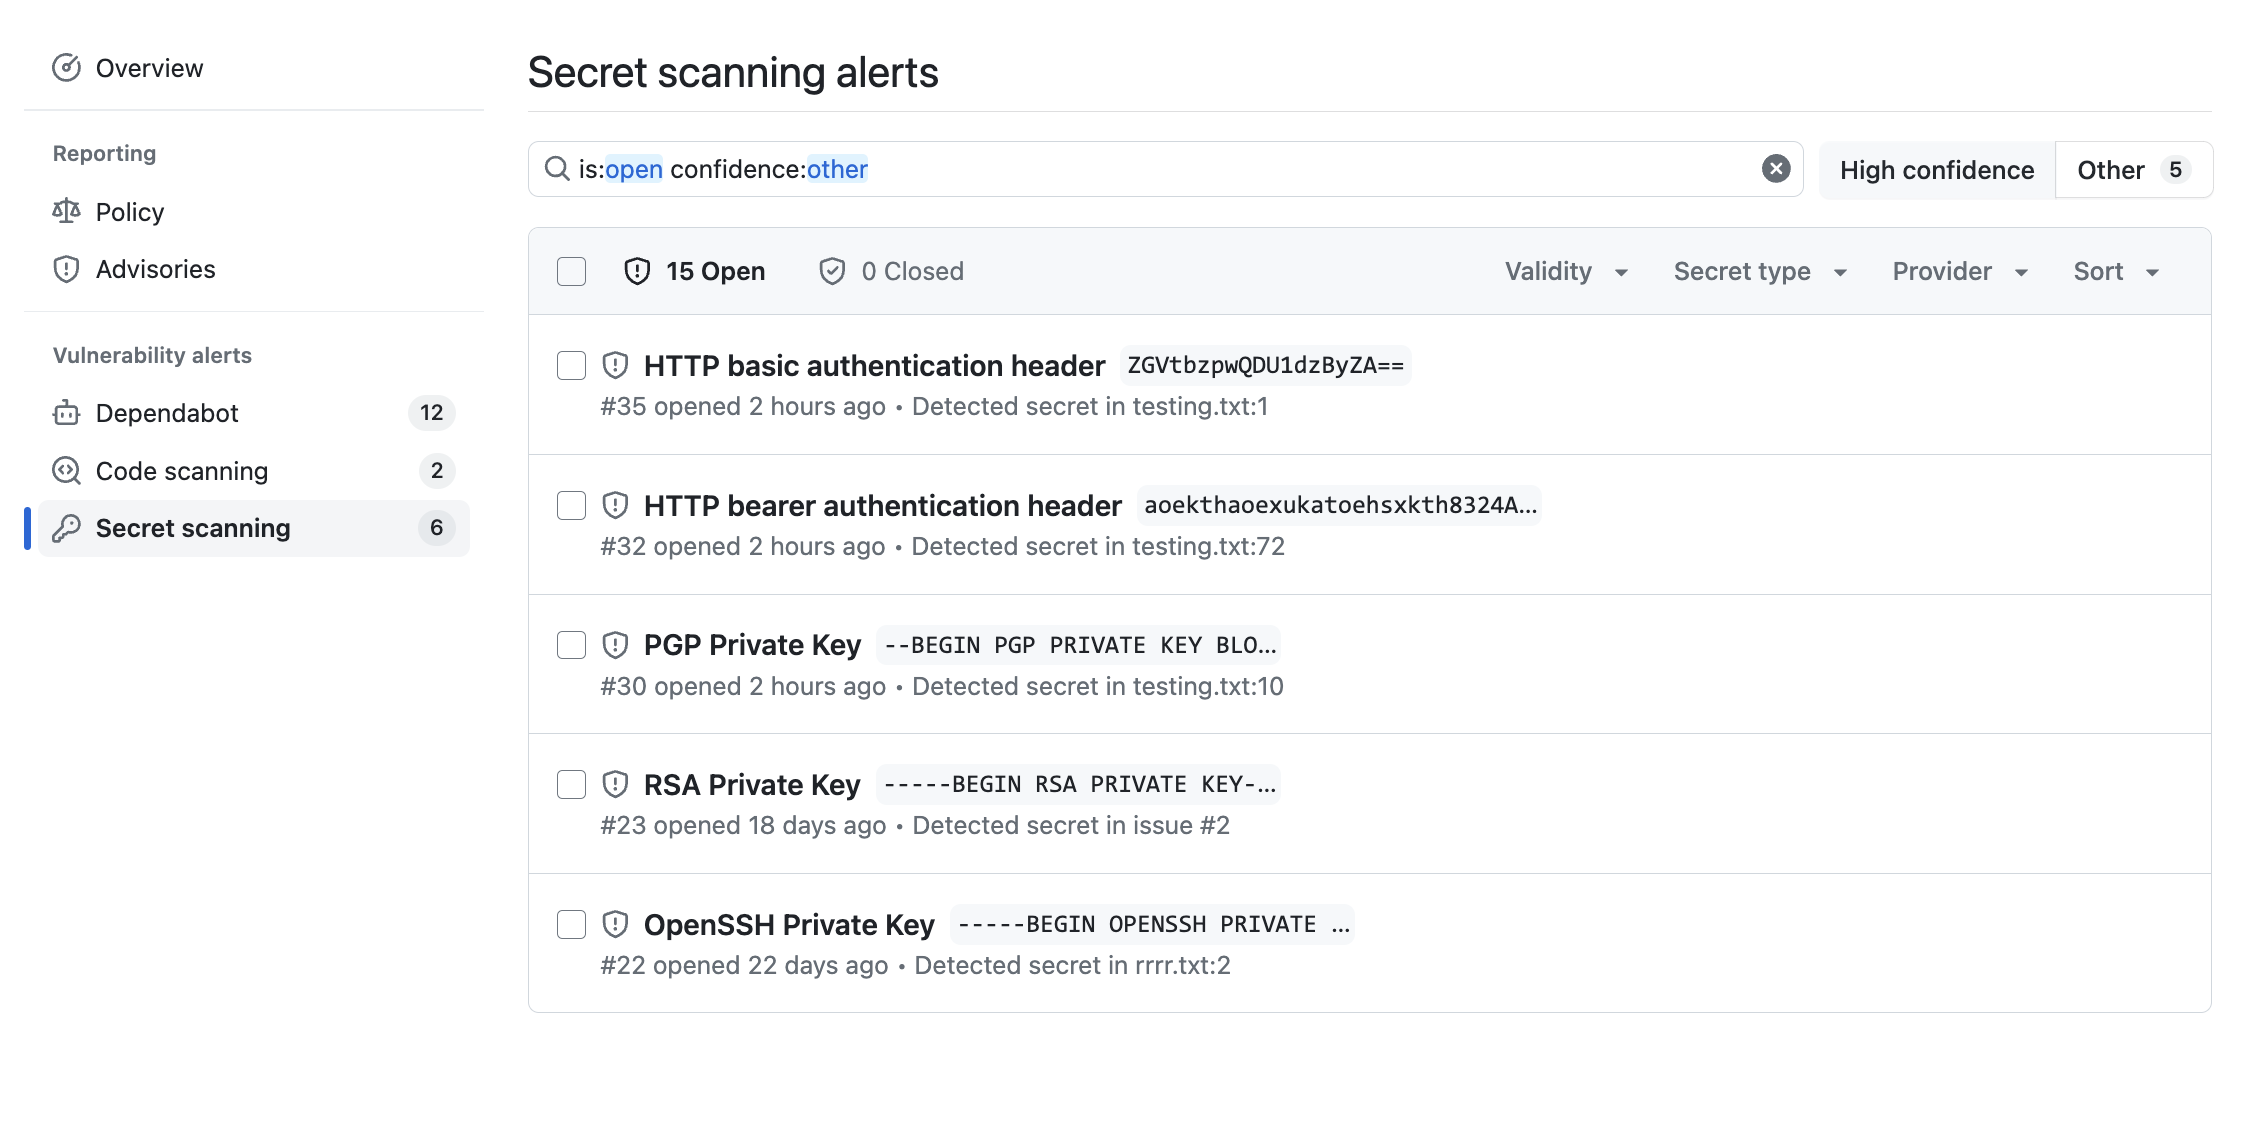 screenshot of secret scanning alerts showing a tab called Other with alerts for five non-provider patterns